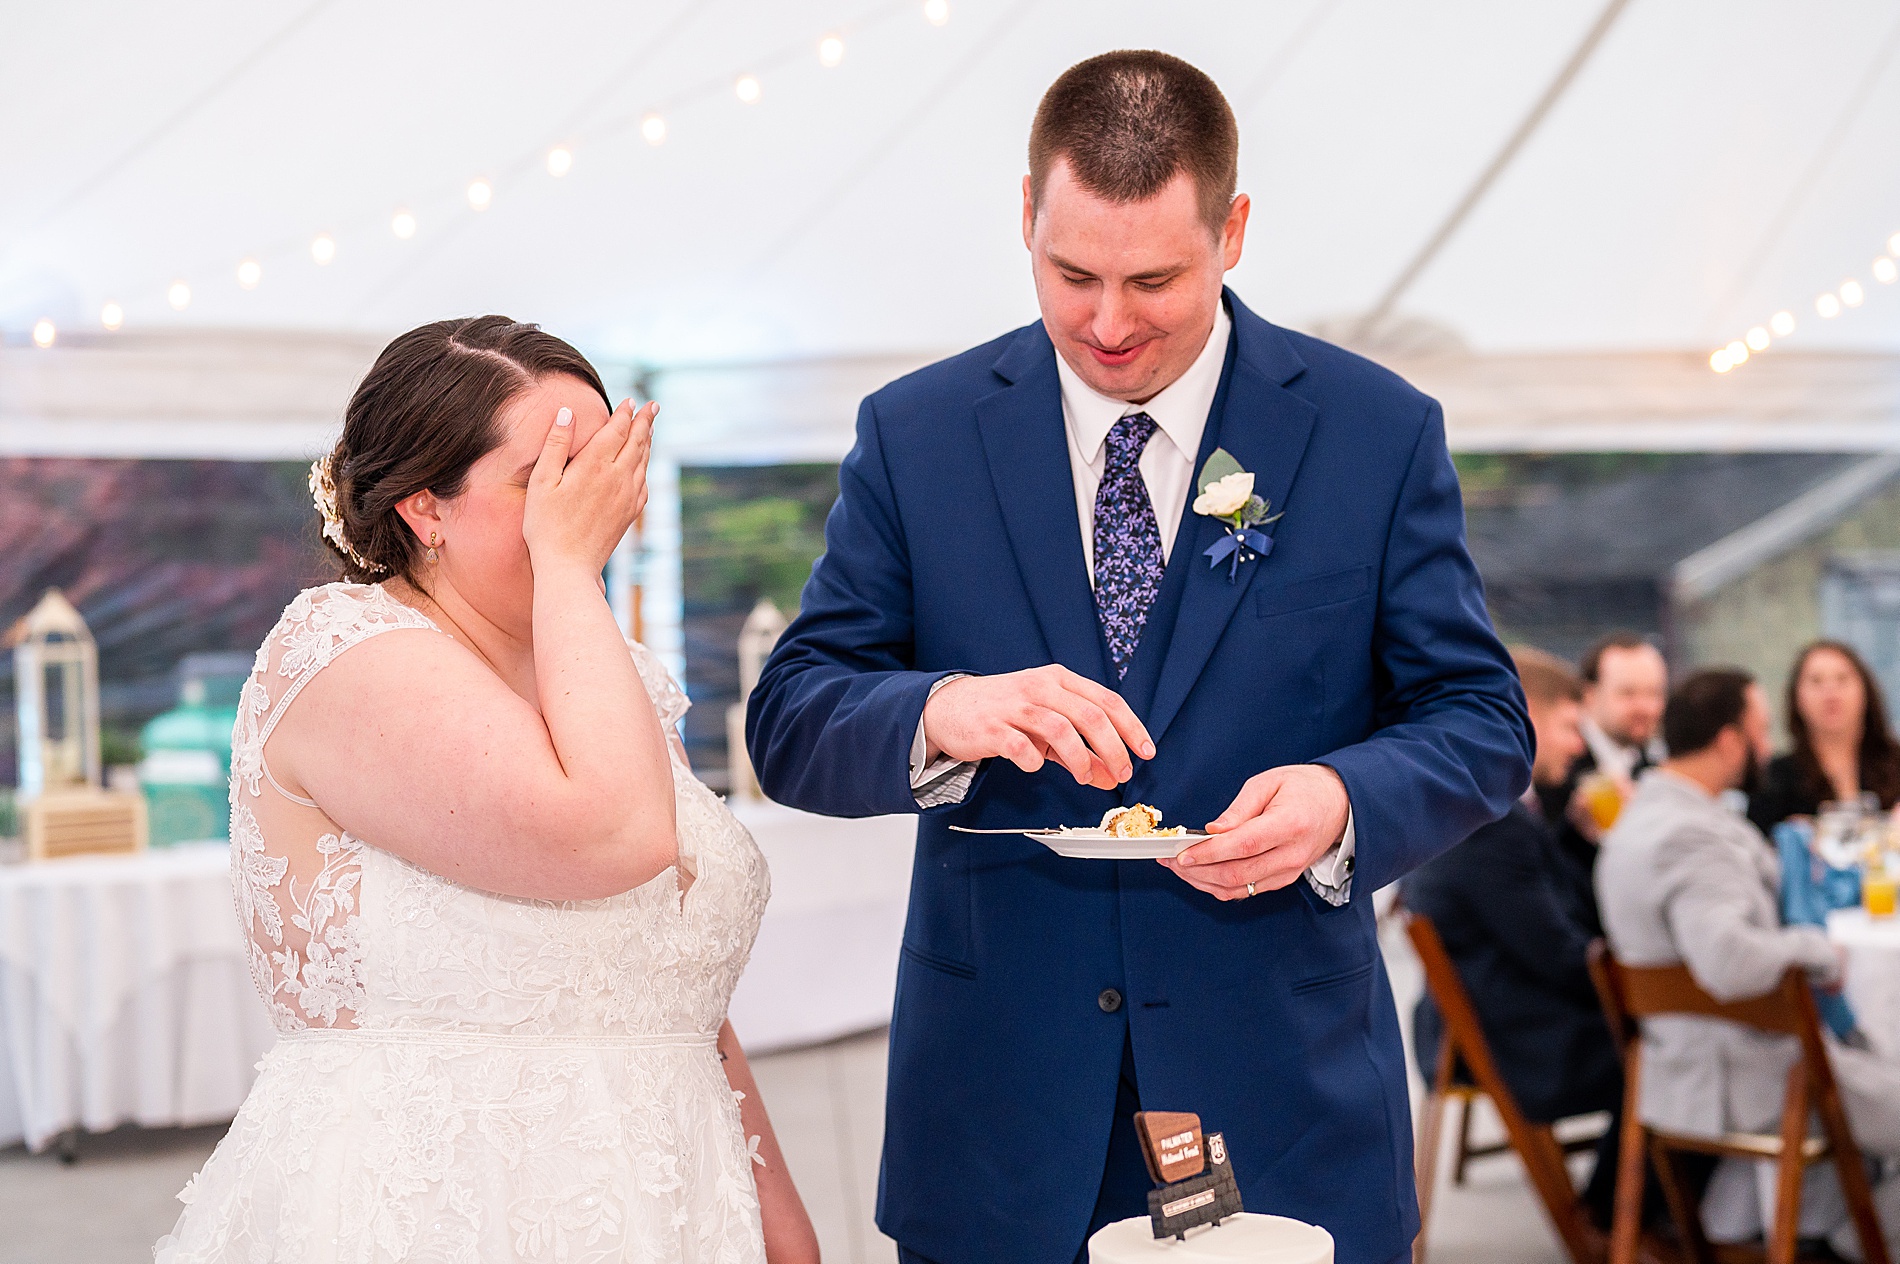 bride reacts to groom feeding himself the cake first